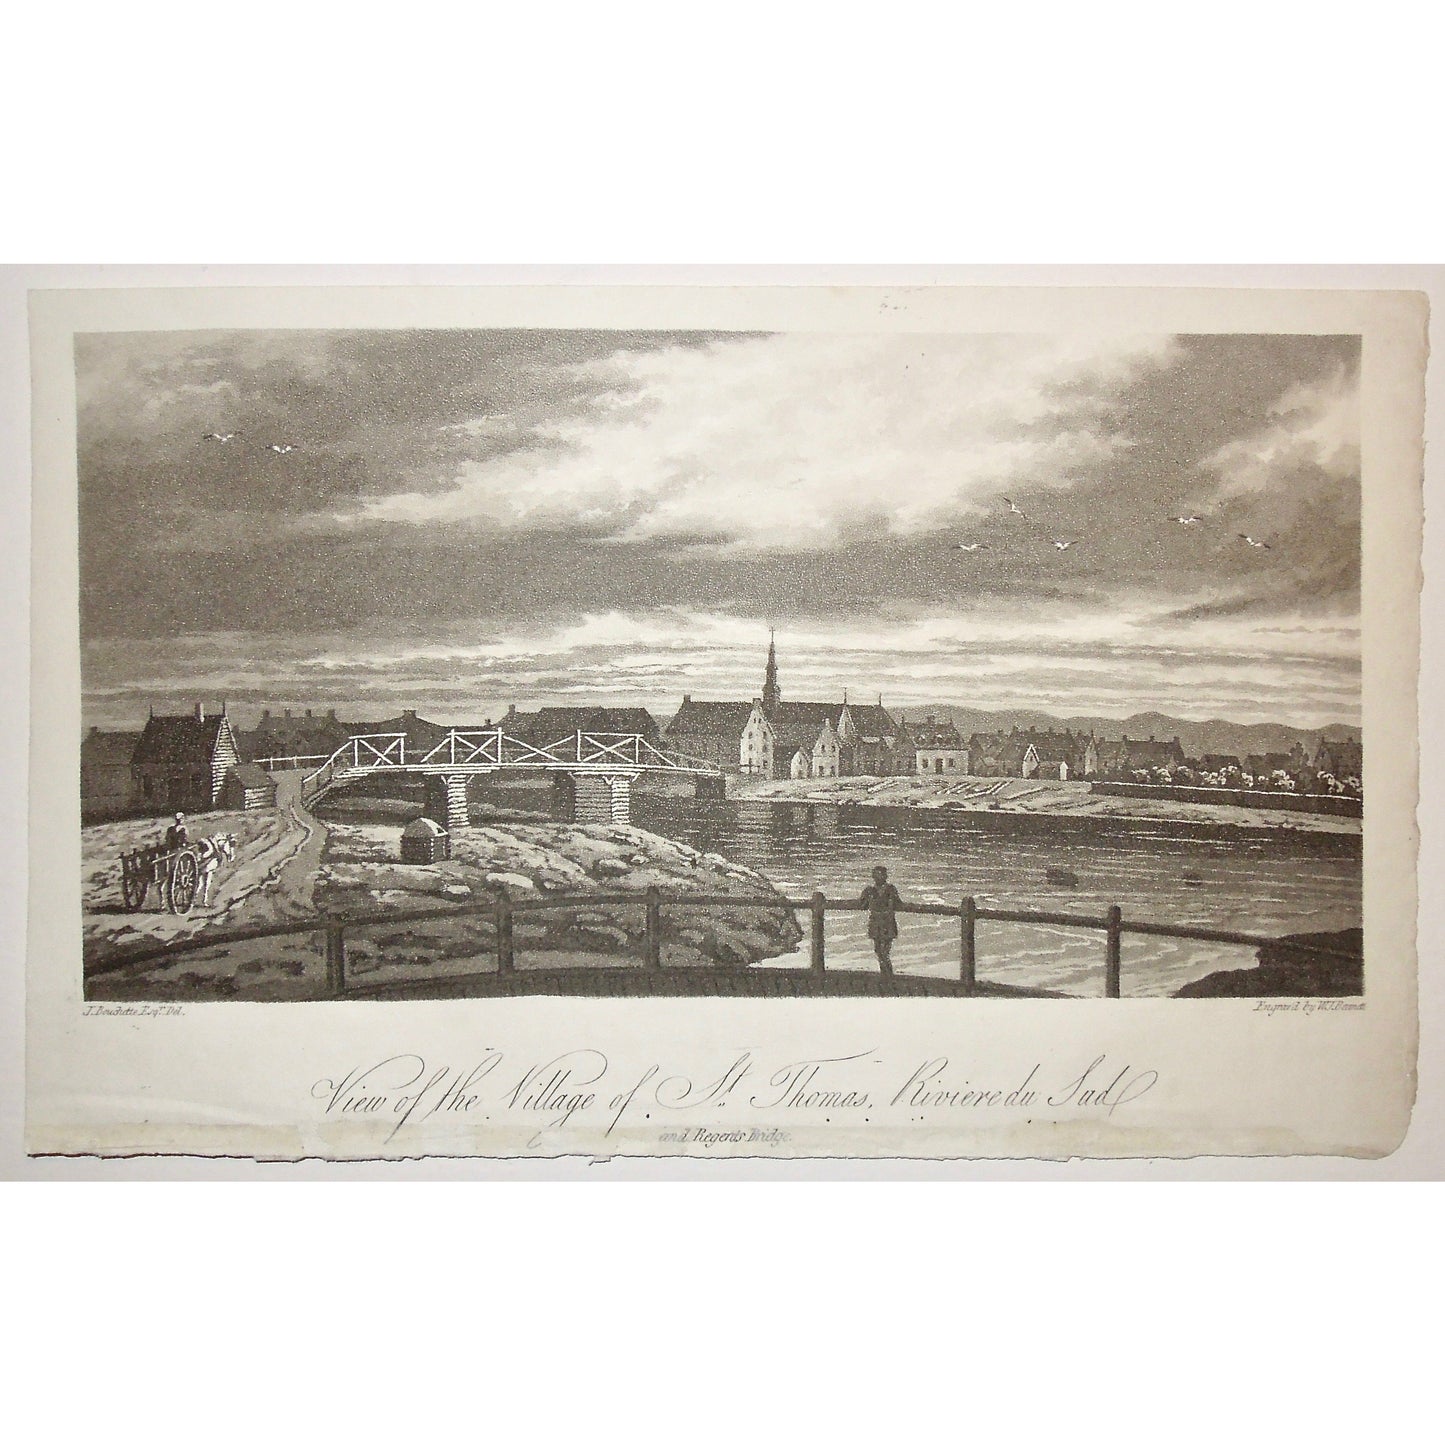 View, Village, St. Thomas, Riviere du Sud, Quebec, Canada, town, bridge, church, horse and carriage, horse and buggy, Canadian village, A Topographical Description of the Province of Lower Canada, Lower Canada, Joseph Bouchette, Bouchette, 1815, W. Faden, Faden, W. J. Bennett, Bennett, Charing Cross, London, steel engraving, black and white, Antique Prints, Antique, Prints, Original, Engravings, Art, Wall decor, Home decor, Vintage, Collectable, Interior Design, Design, Detail, Steel Engraving, 